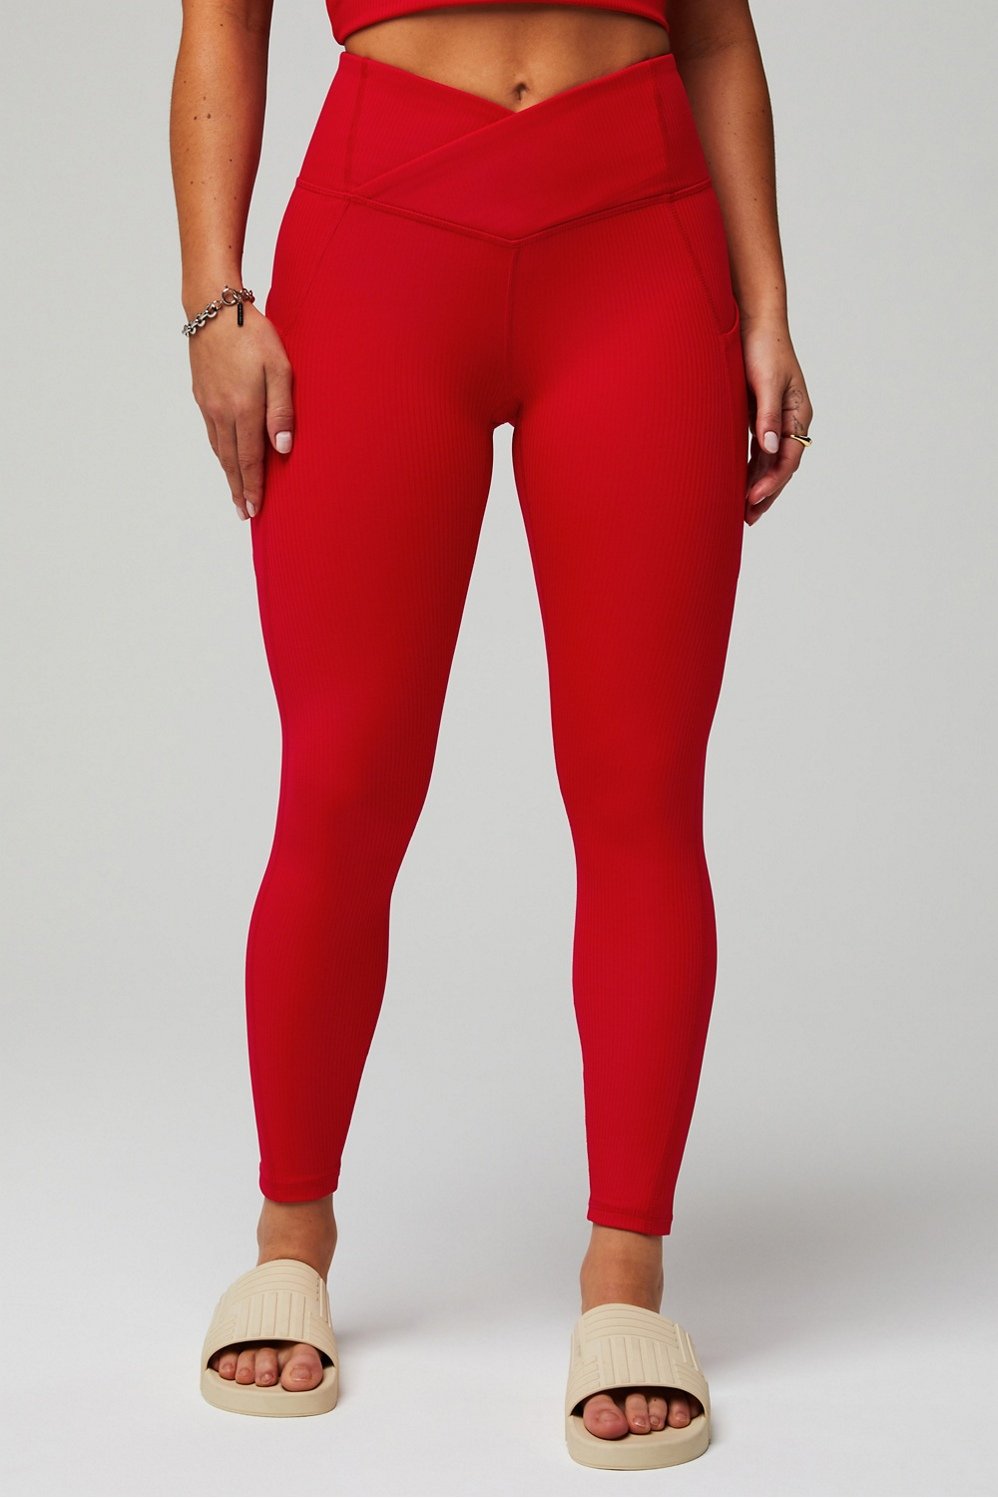 Fabletics NWT Crushed Velour Crossover Leggings Strawberry Red